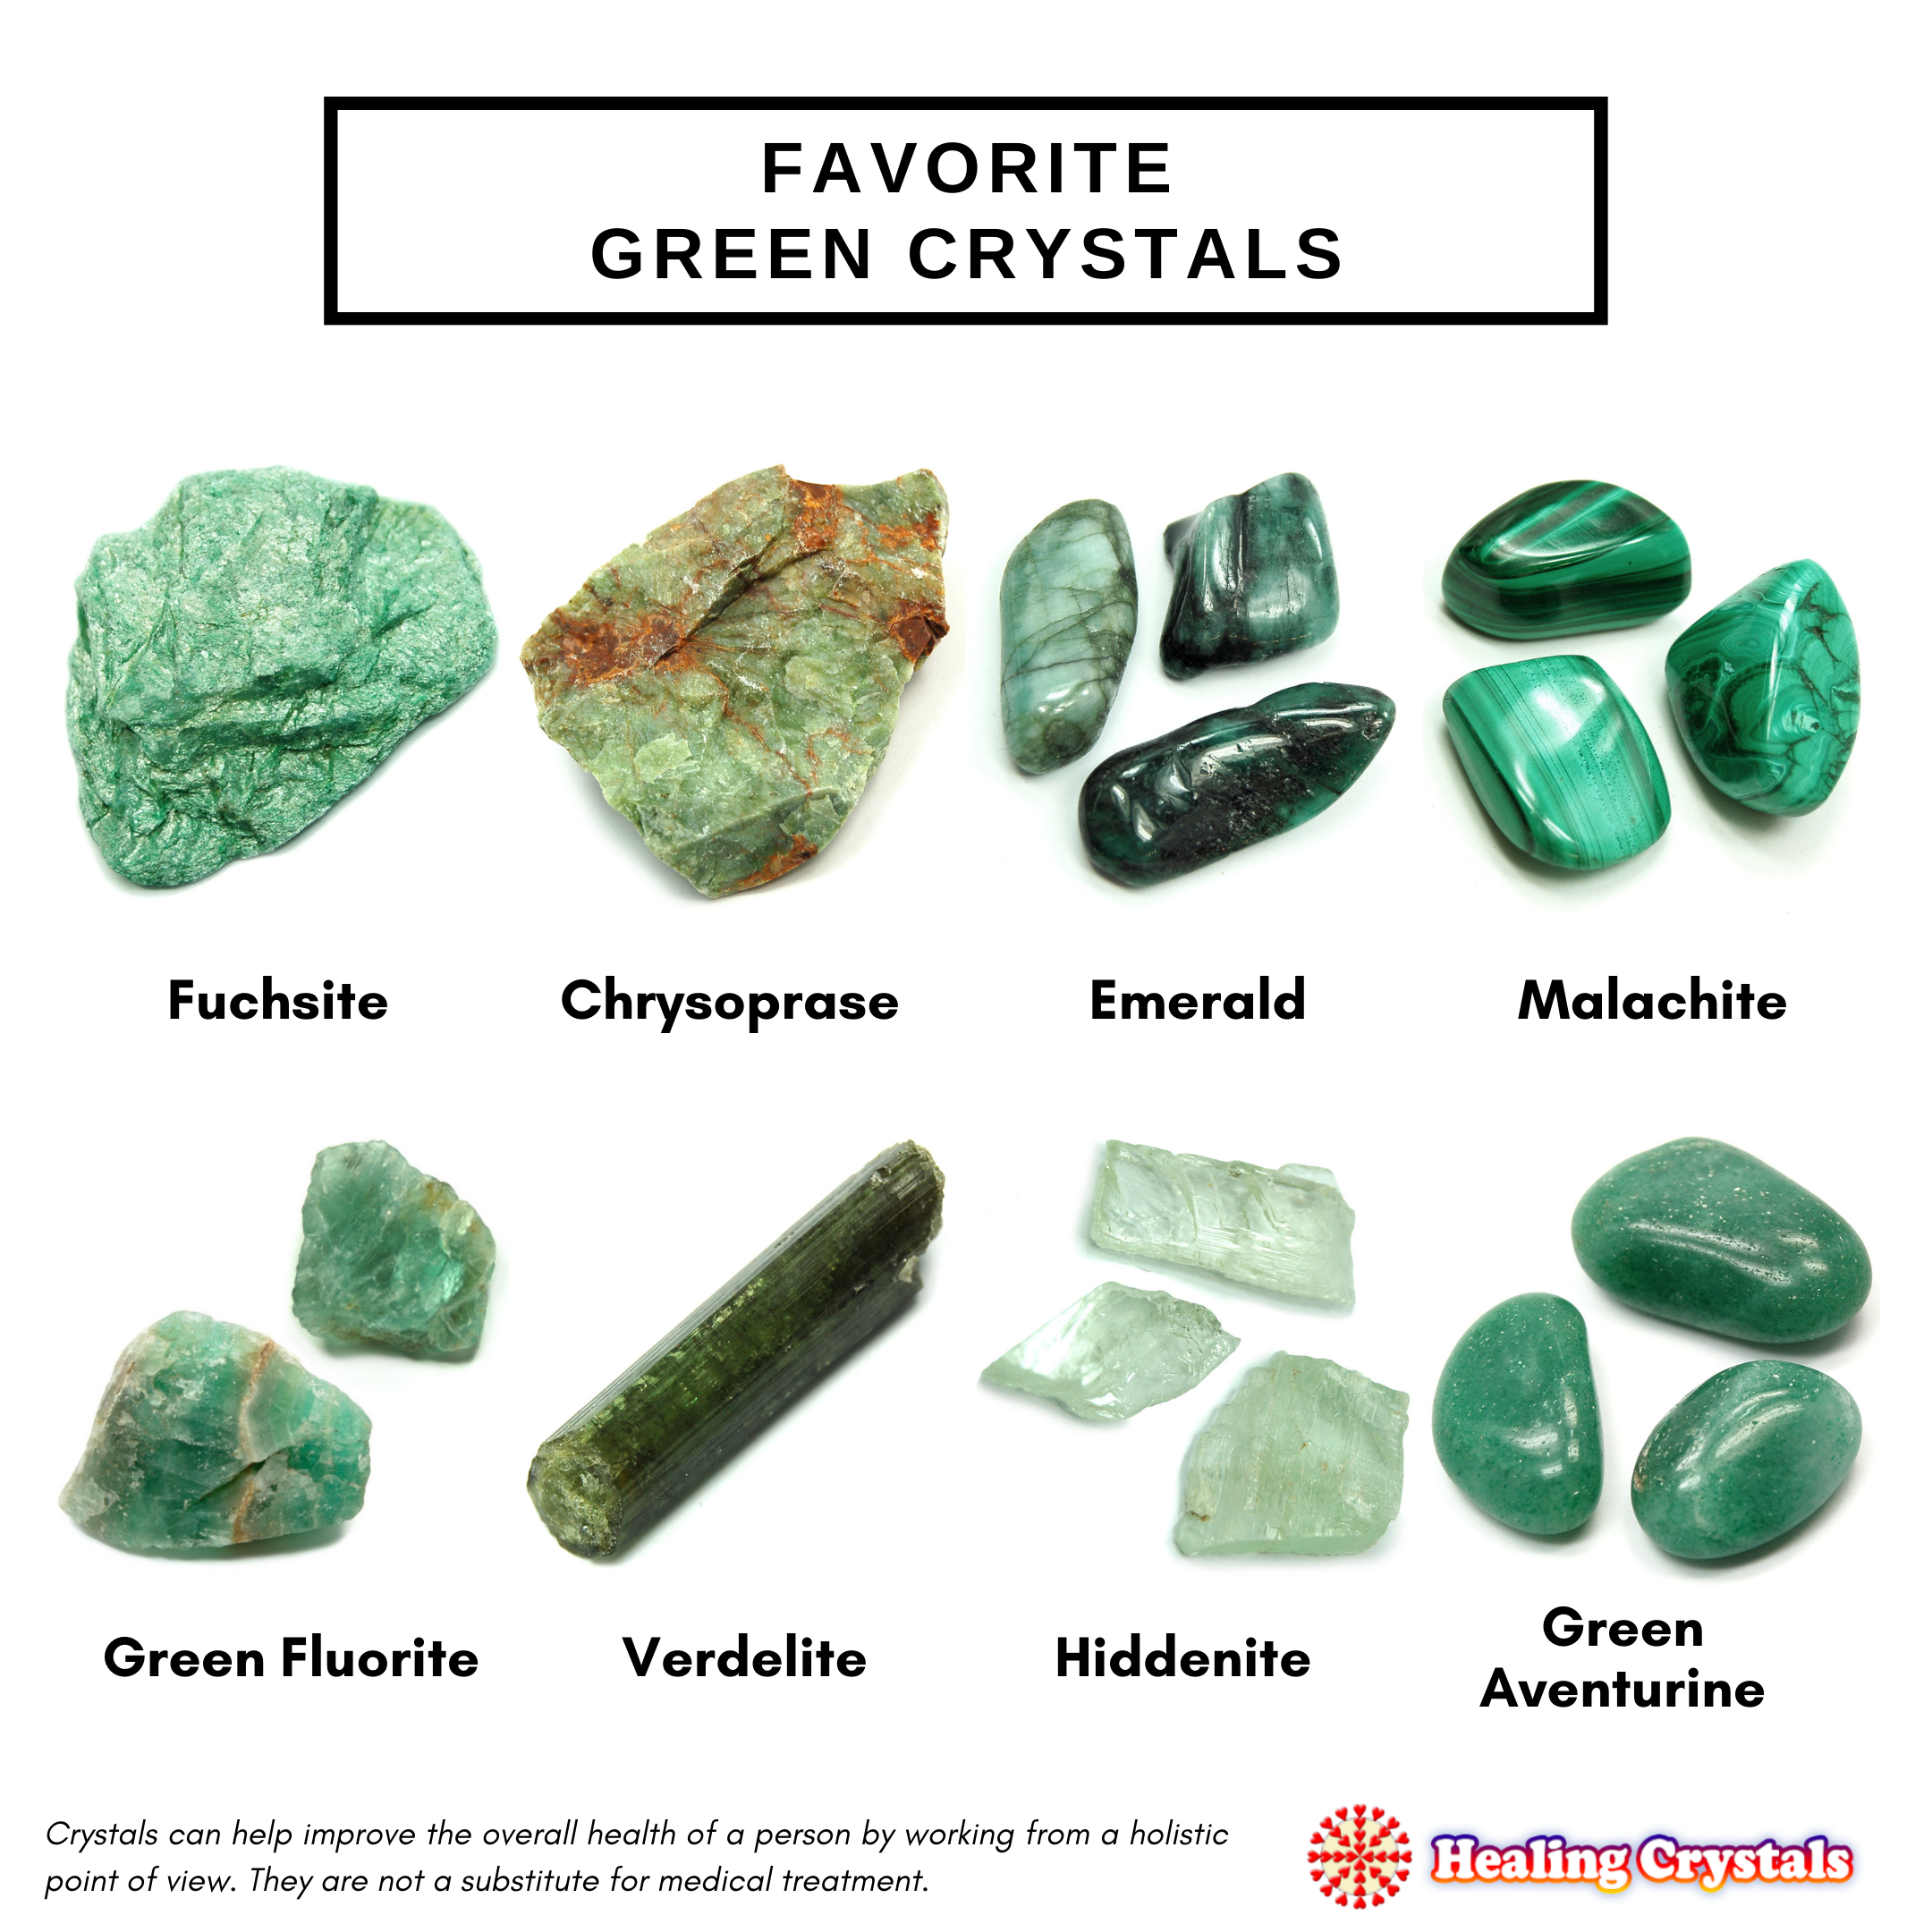 Our favorite Green Crystals